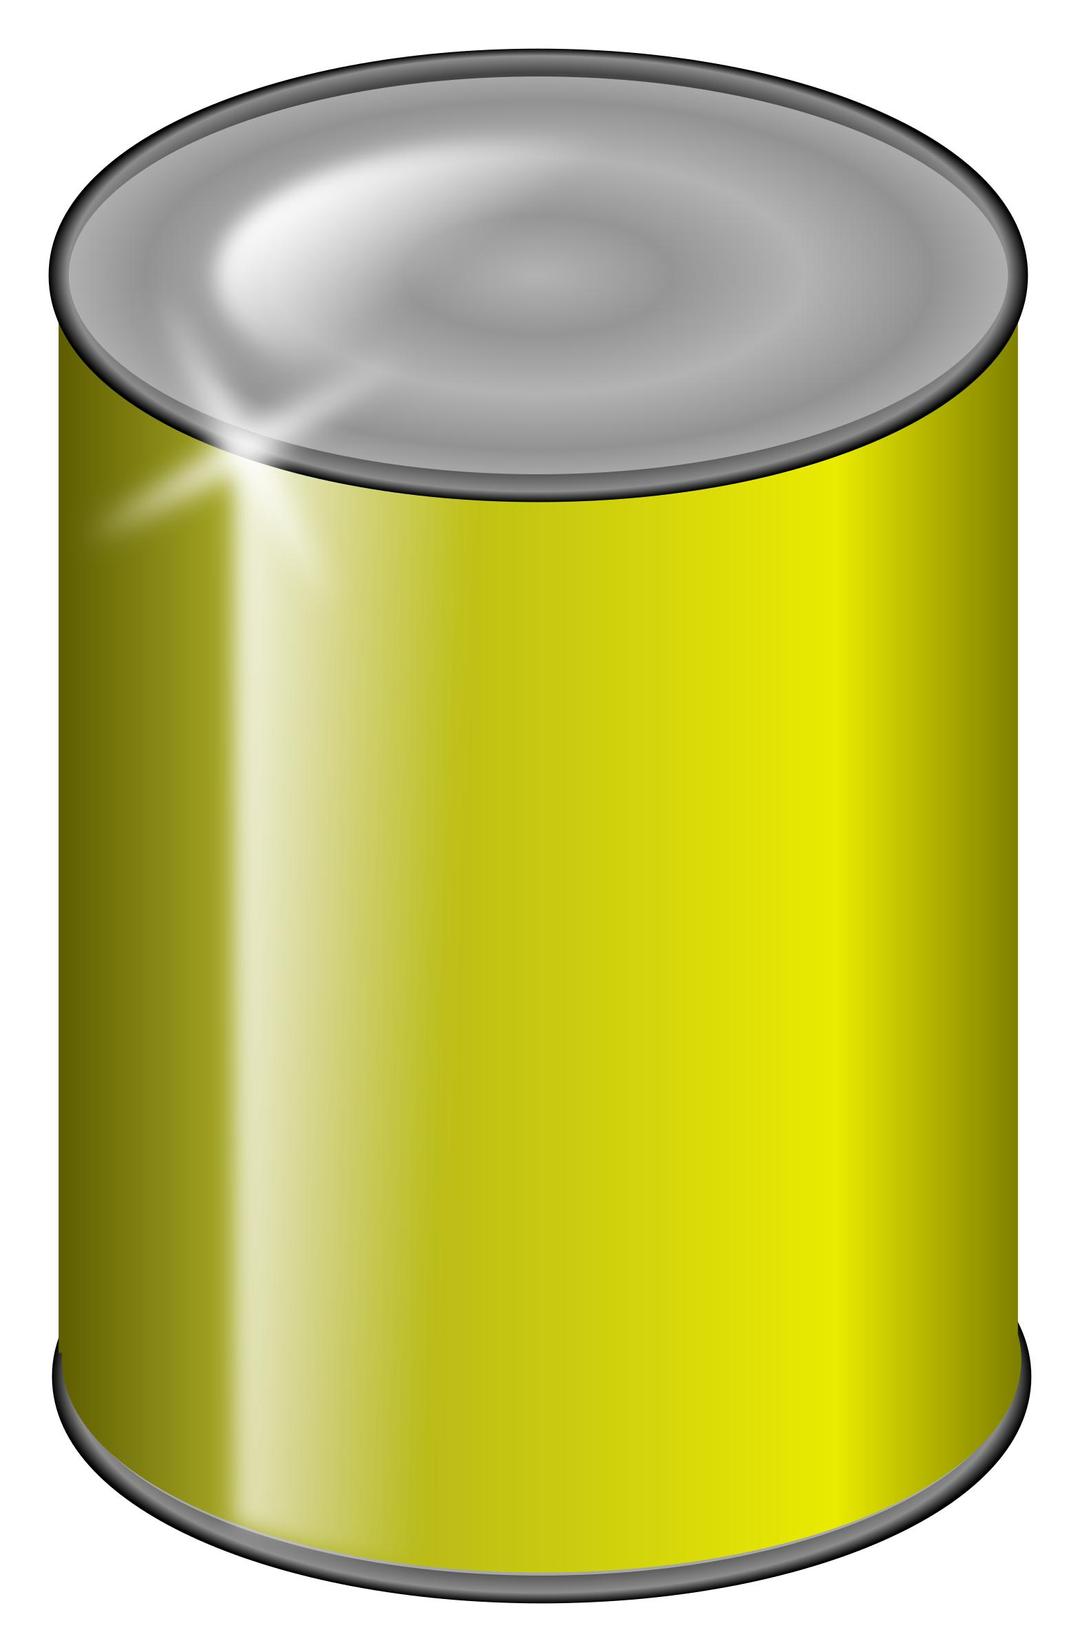 yellow can png transparent